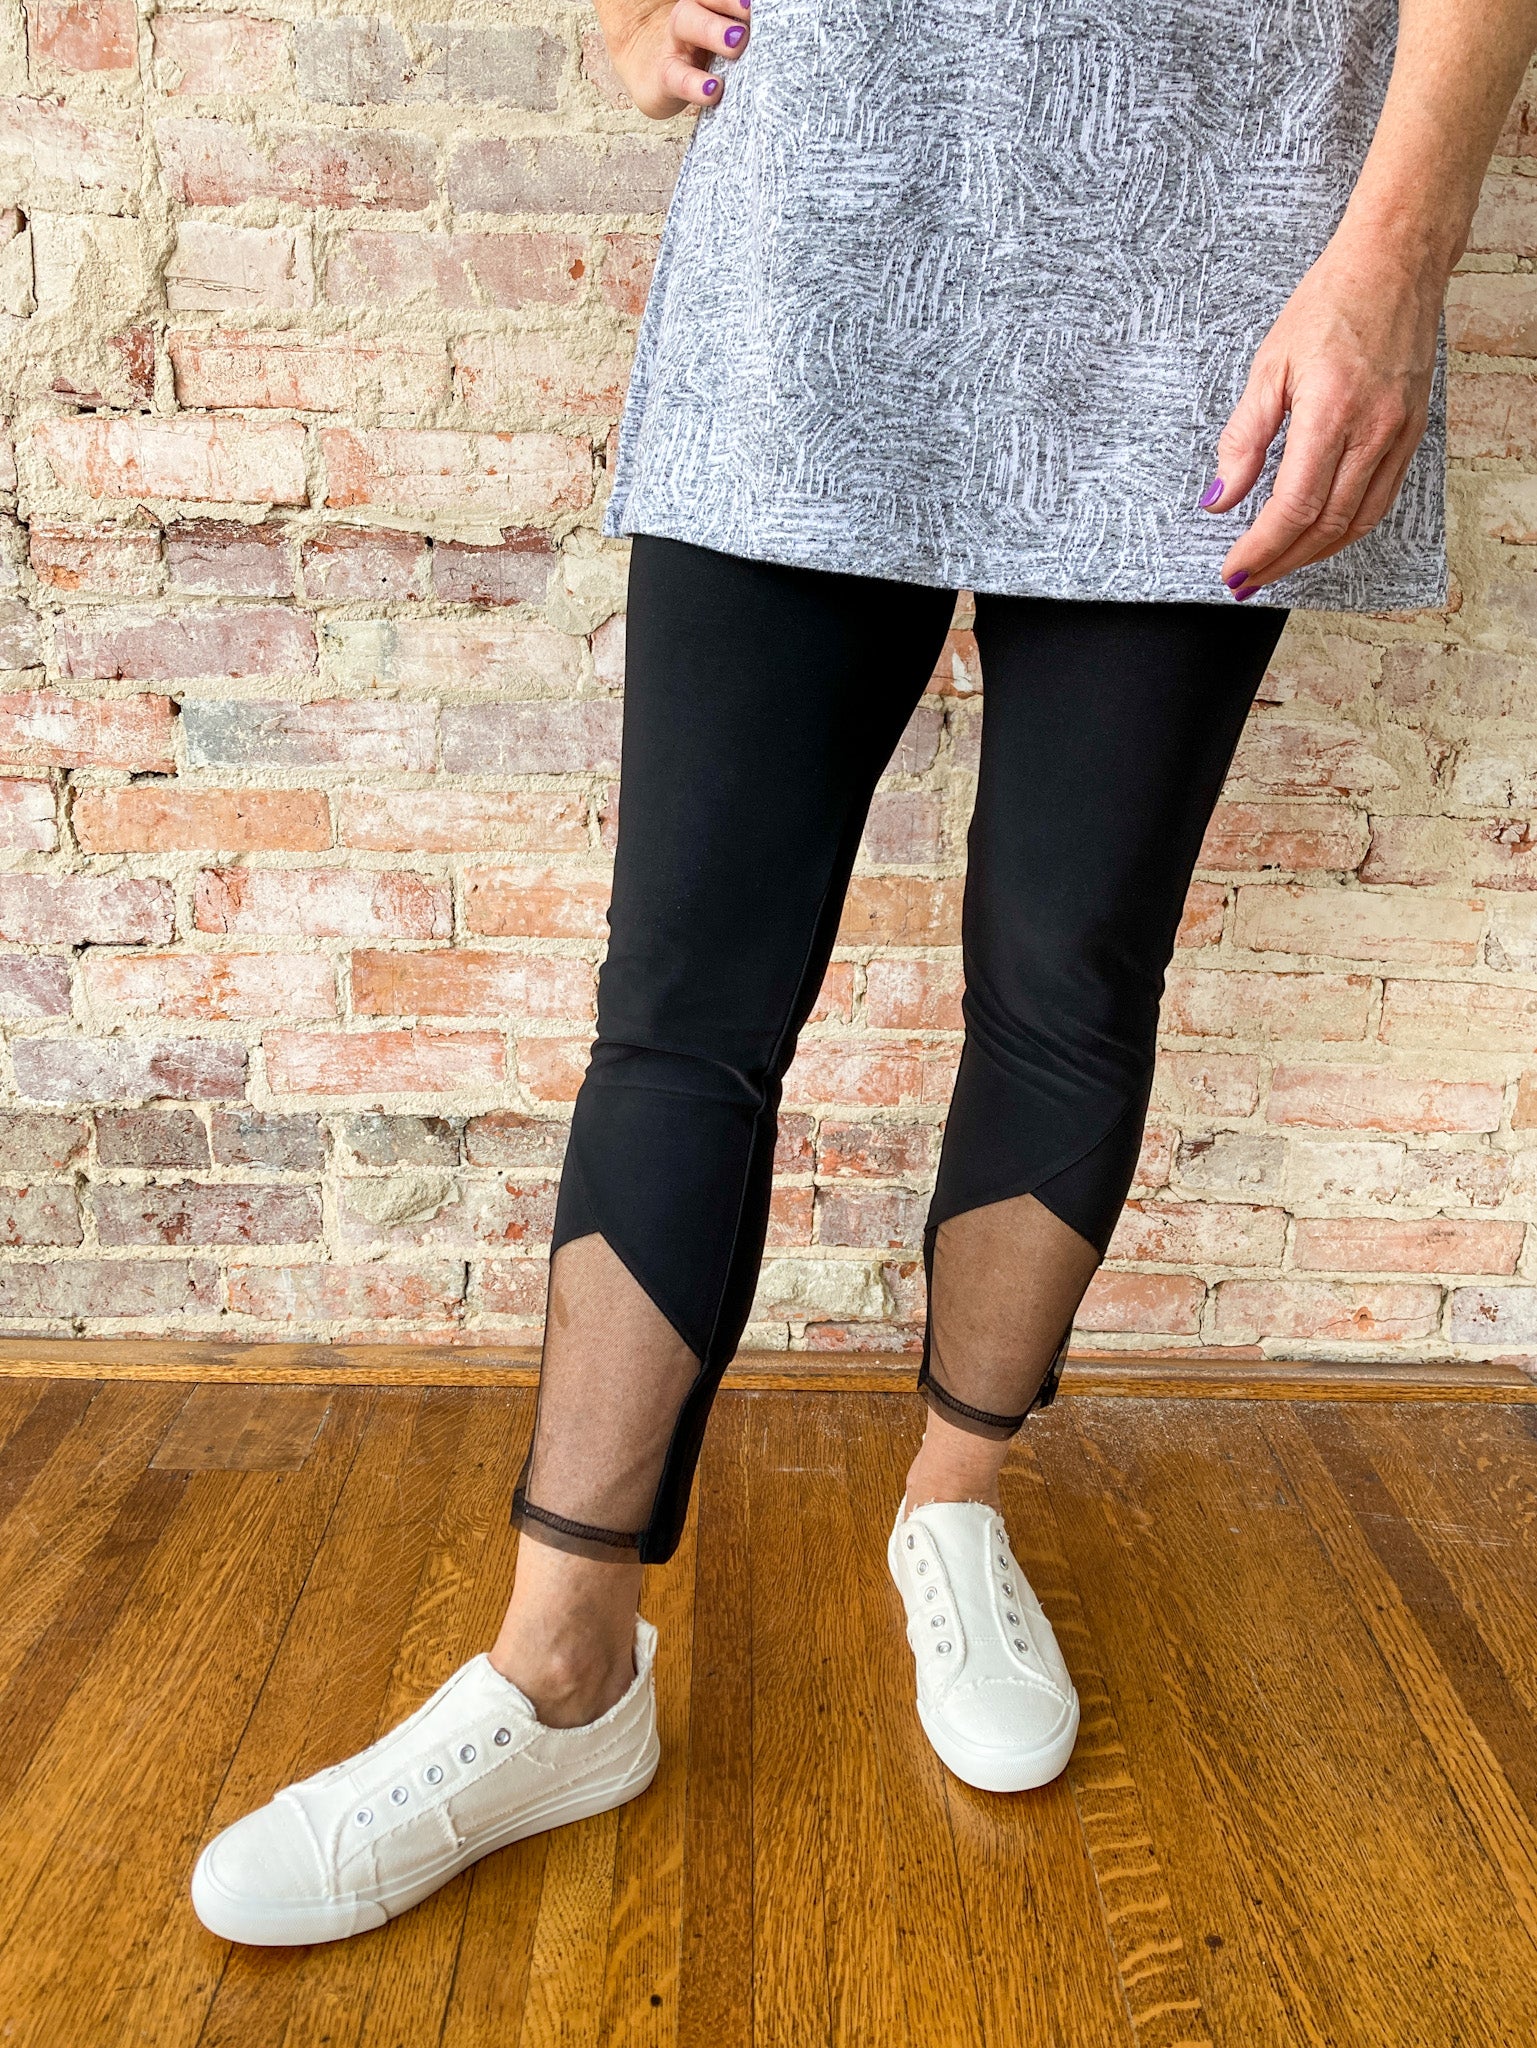 A close up of a woman wearing black leggings with a peek-a-boo mesh design in the front. She is also wearing a grey tunic and some white babalu shoes